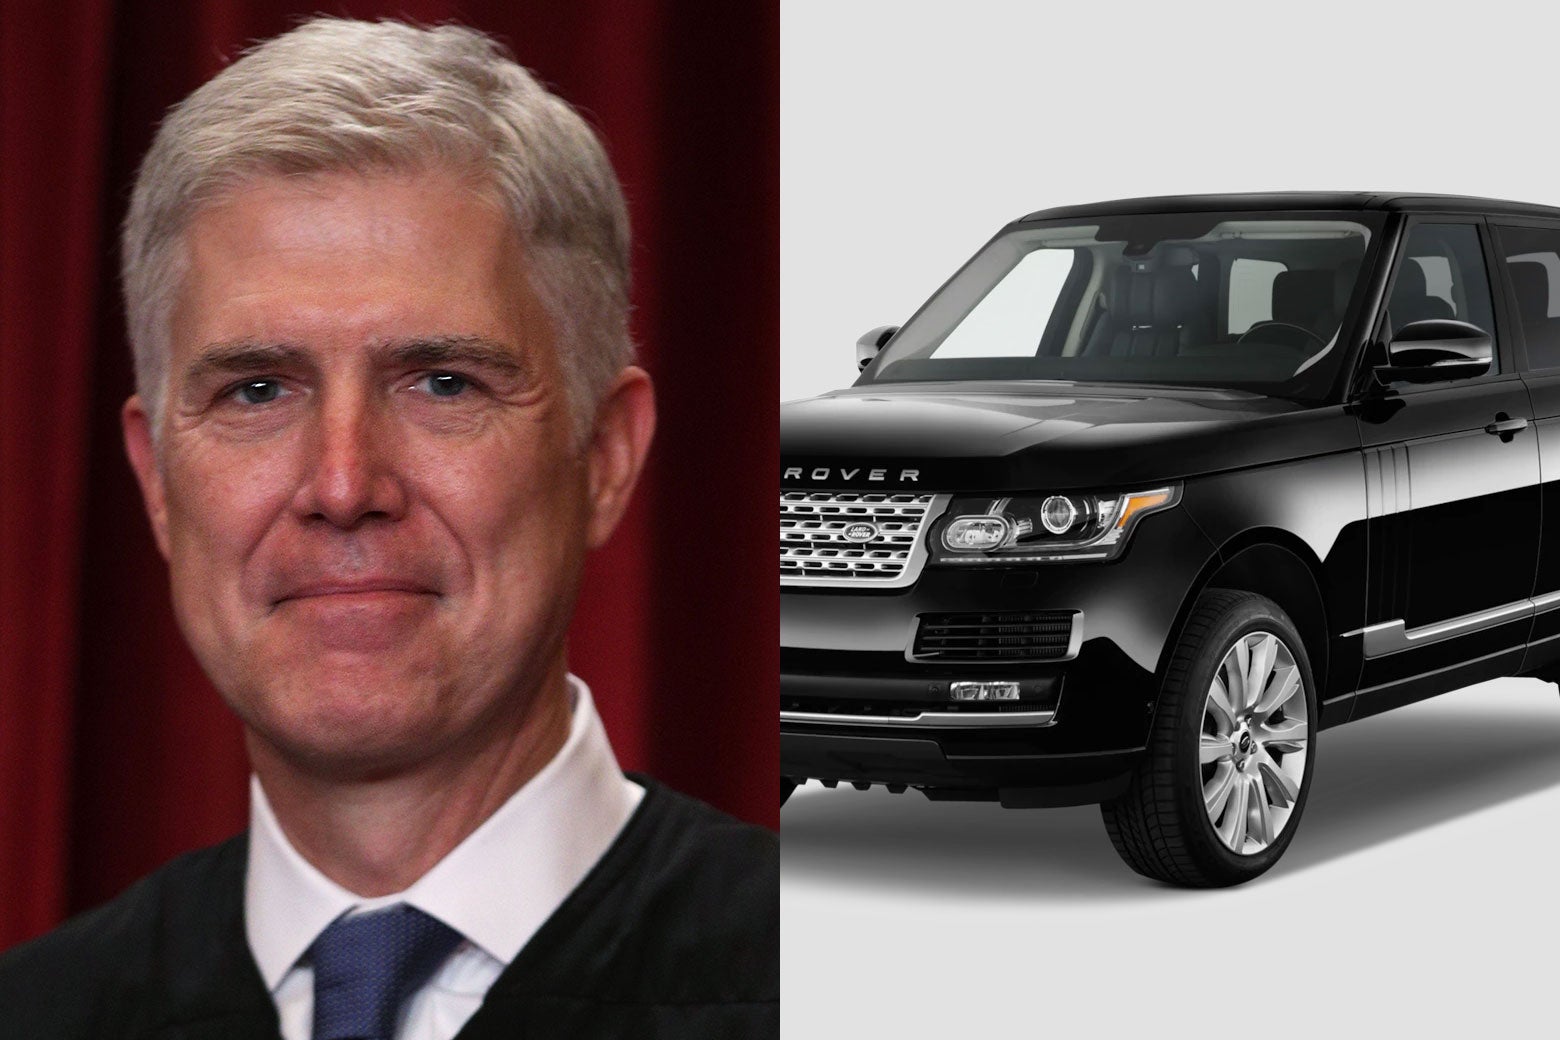 side-by-side photos of Neil Gorsuch and a Land Rover.